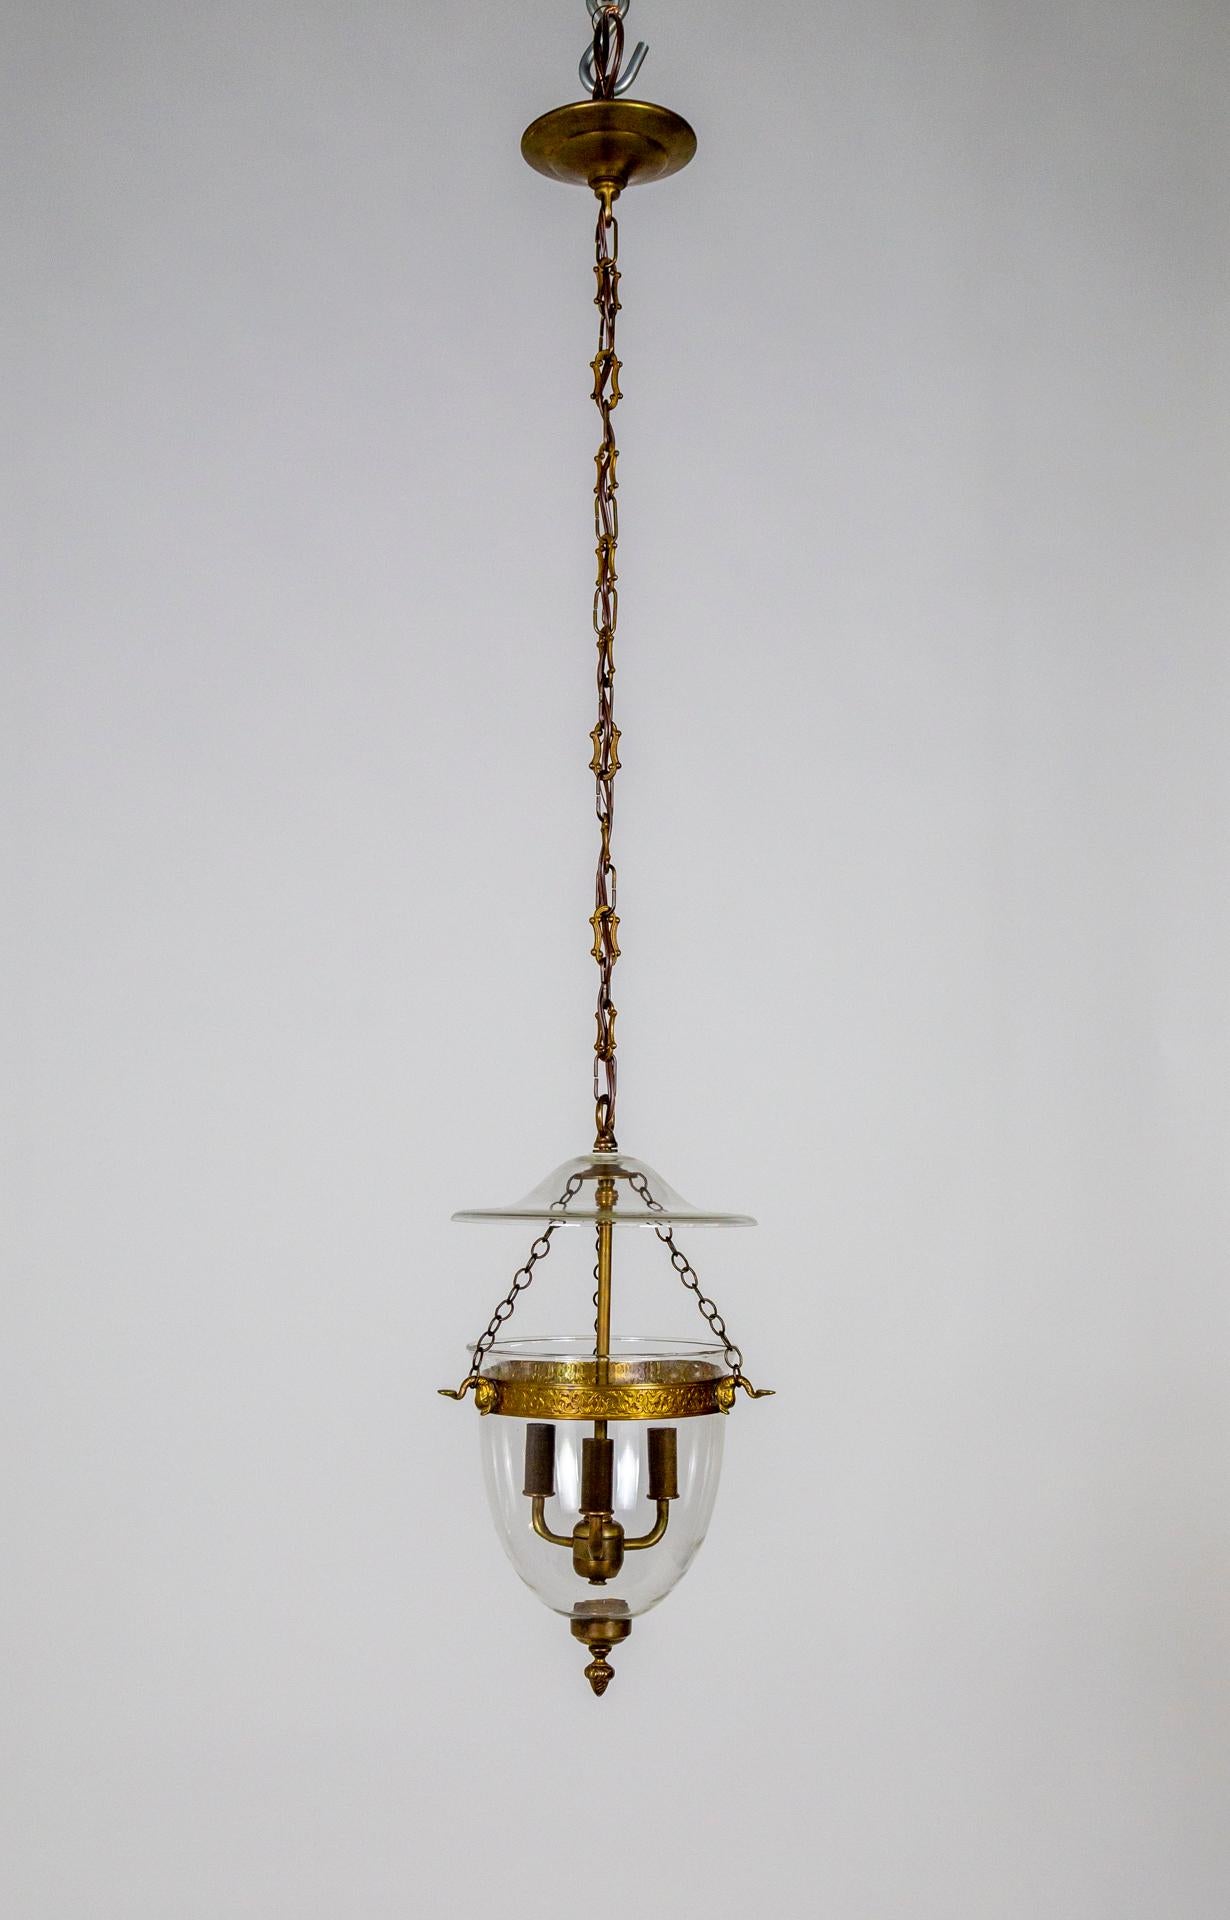 A traditional style bell jar light fixture with a glass smoke cap and brass parts toned in bronze and gold. The rim is pressed with an acanthus leaf pattern and held with cast dolphins to the chains. It hangs from a long, decorative chain and